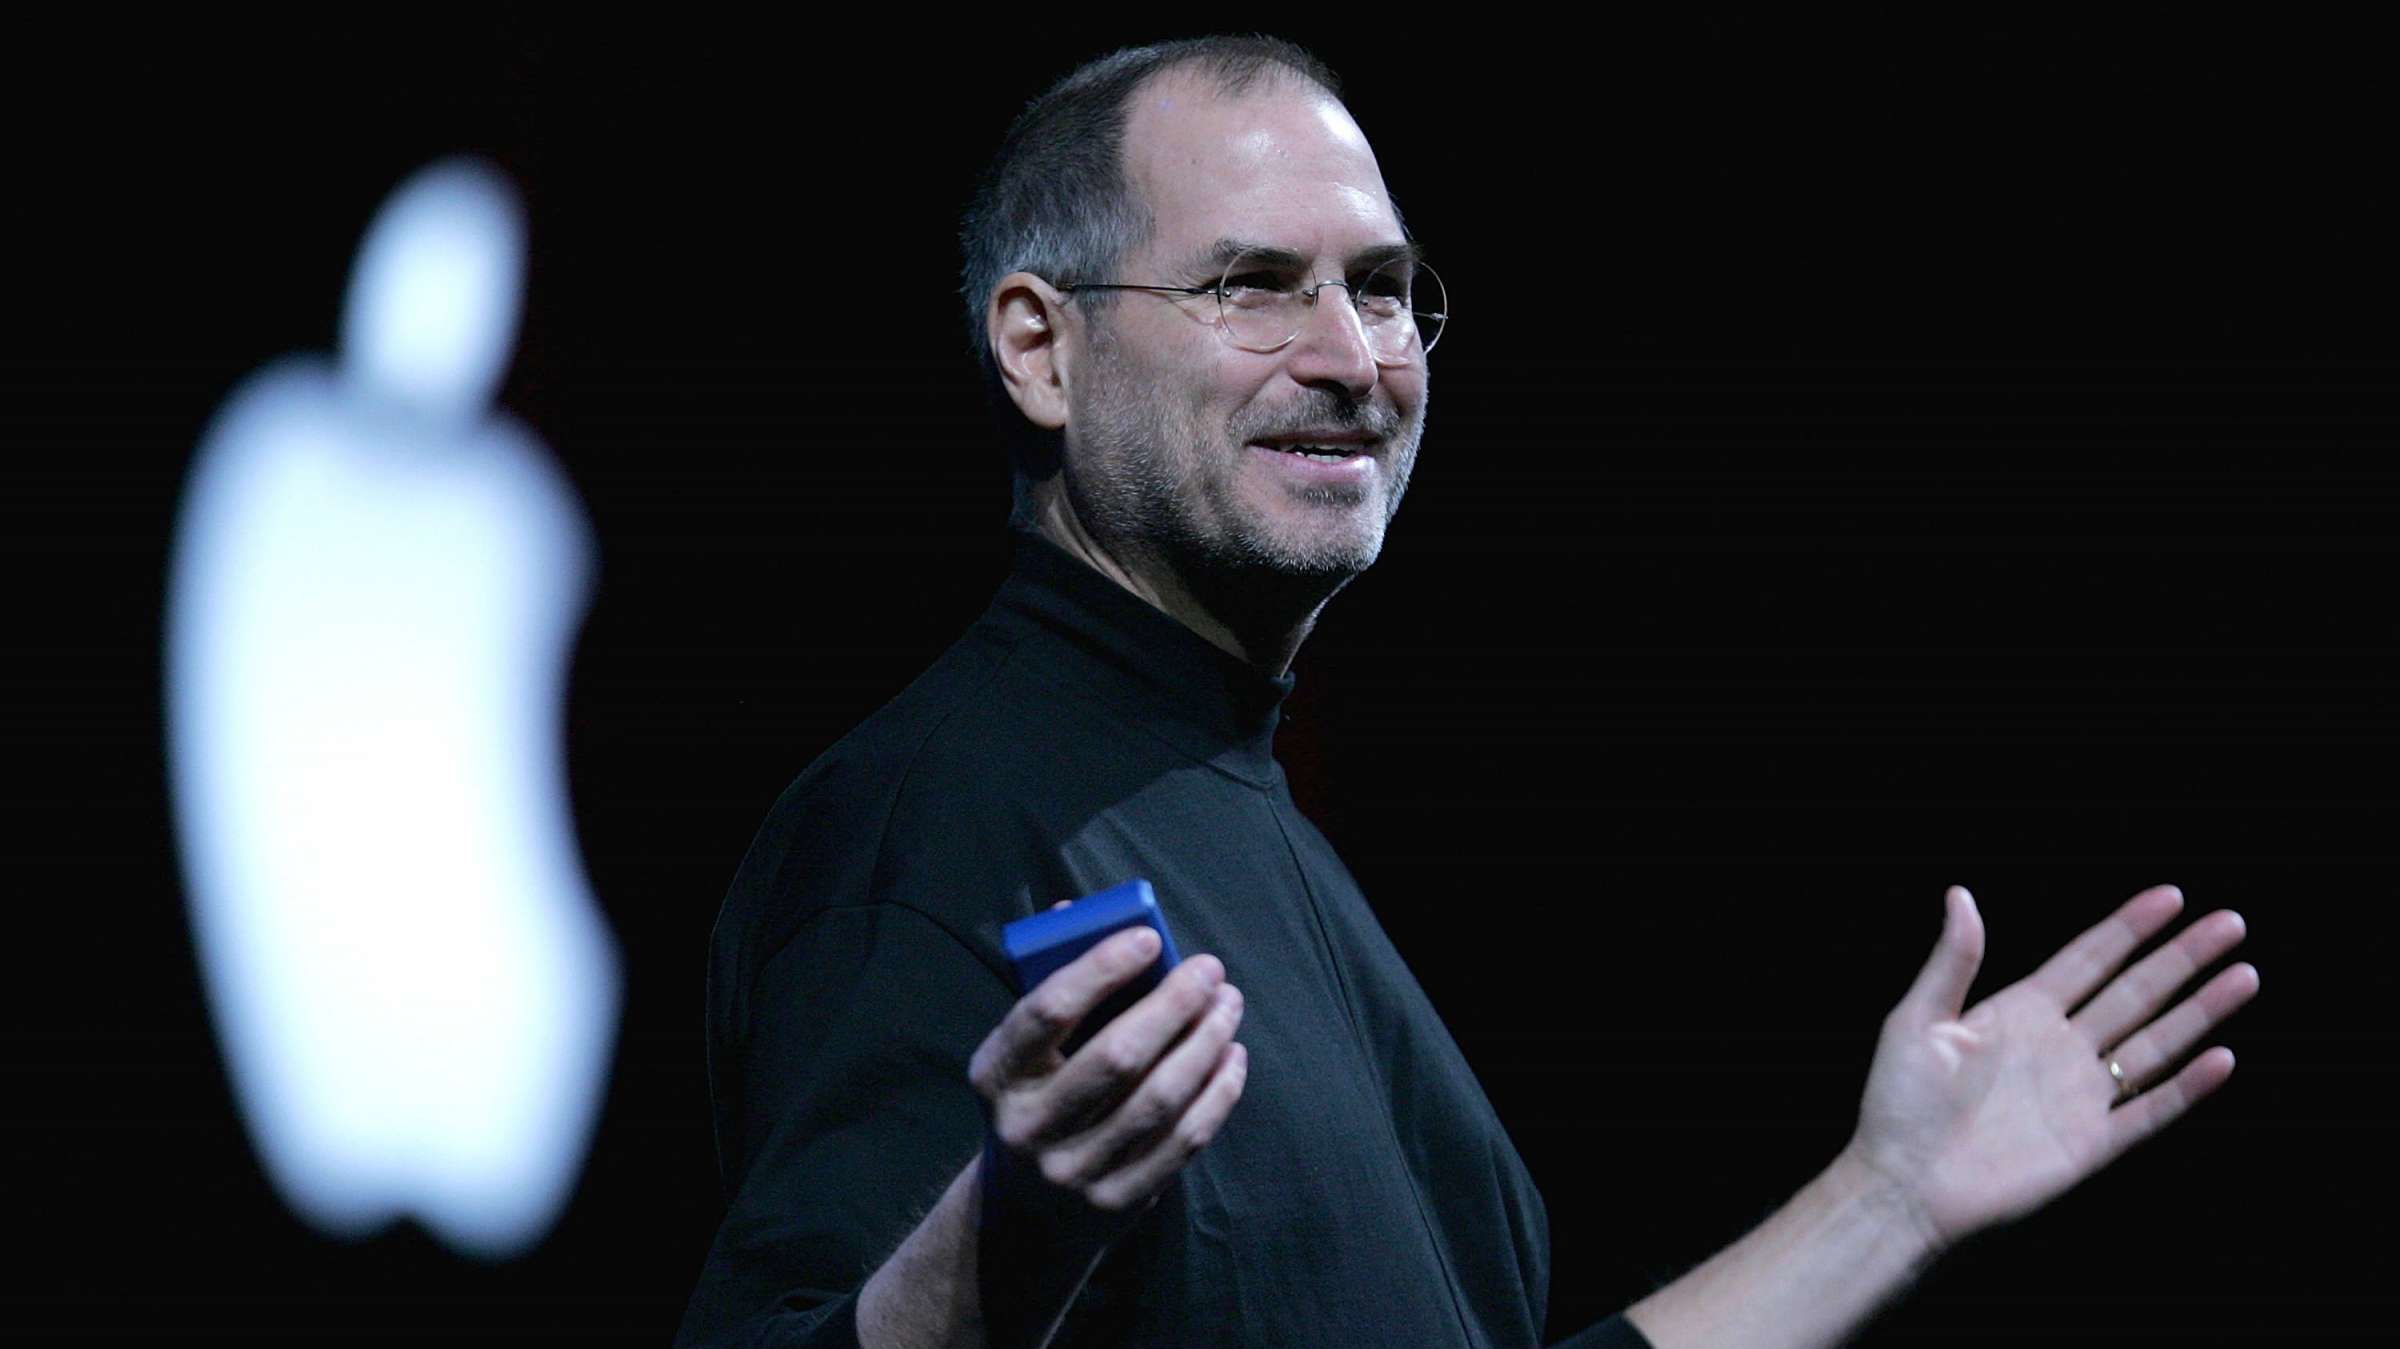 10 Fascinating Facts About Steve Jobs | Mental Floss